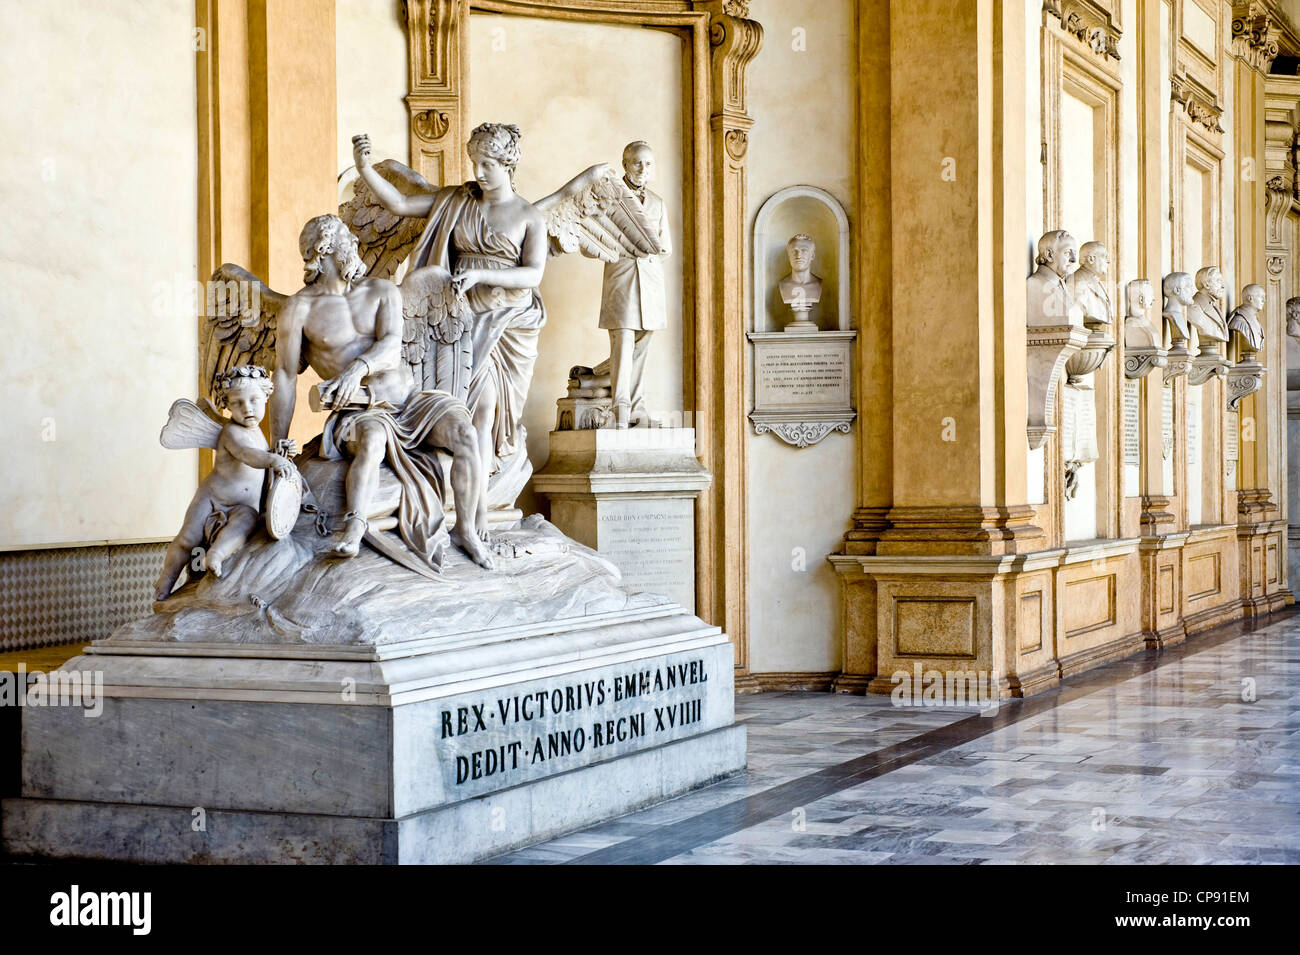 Europe Italy Piedmont Turin Via Po University of statues in the loggia of the courtyard on the first floor Stock Photo